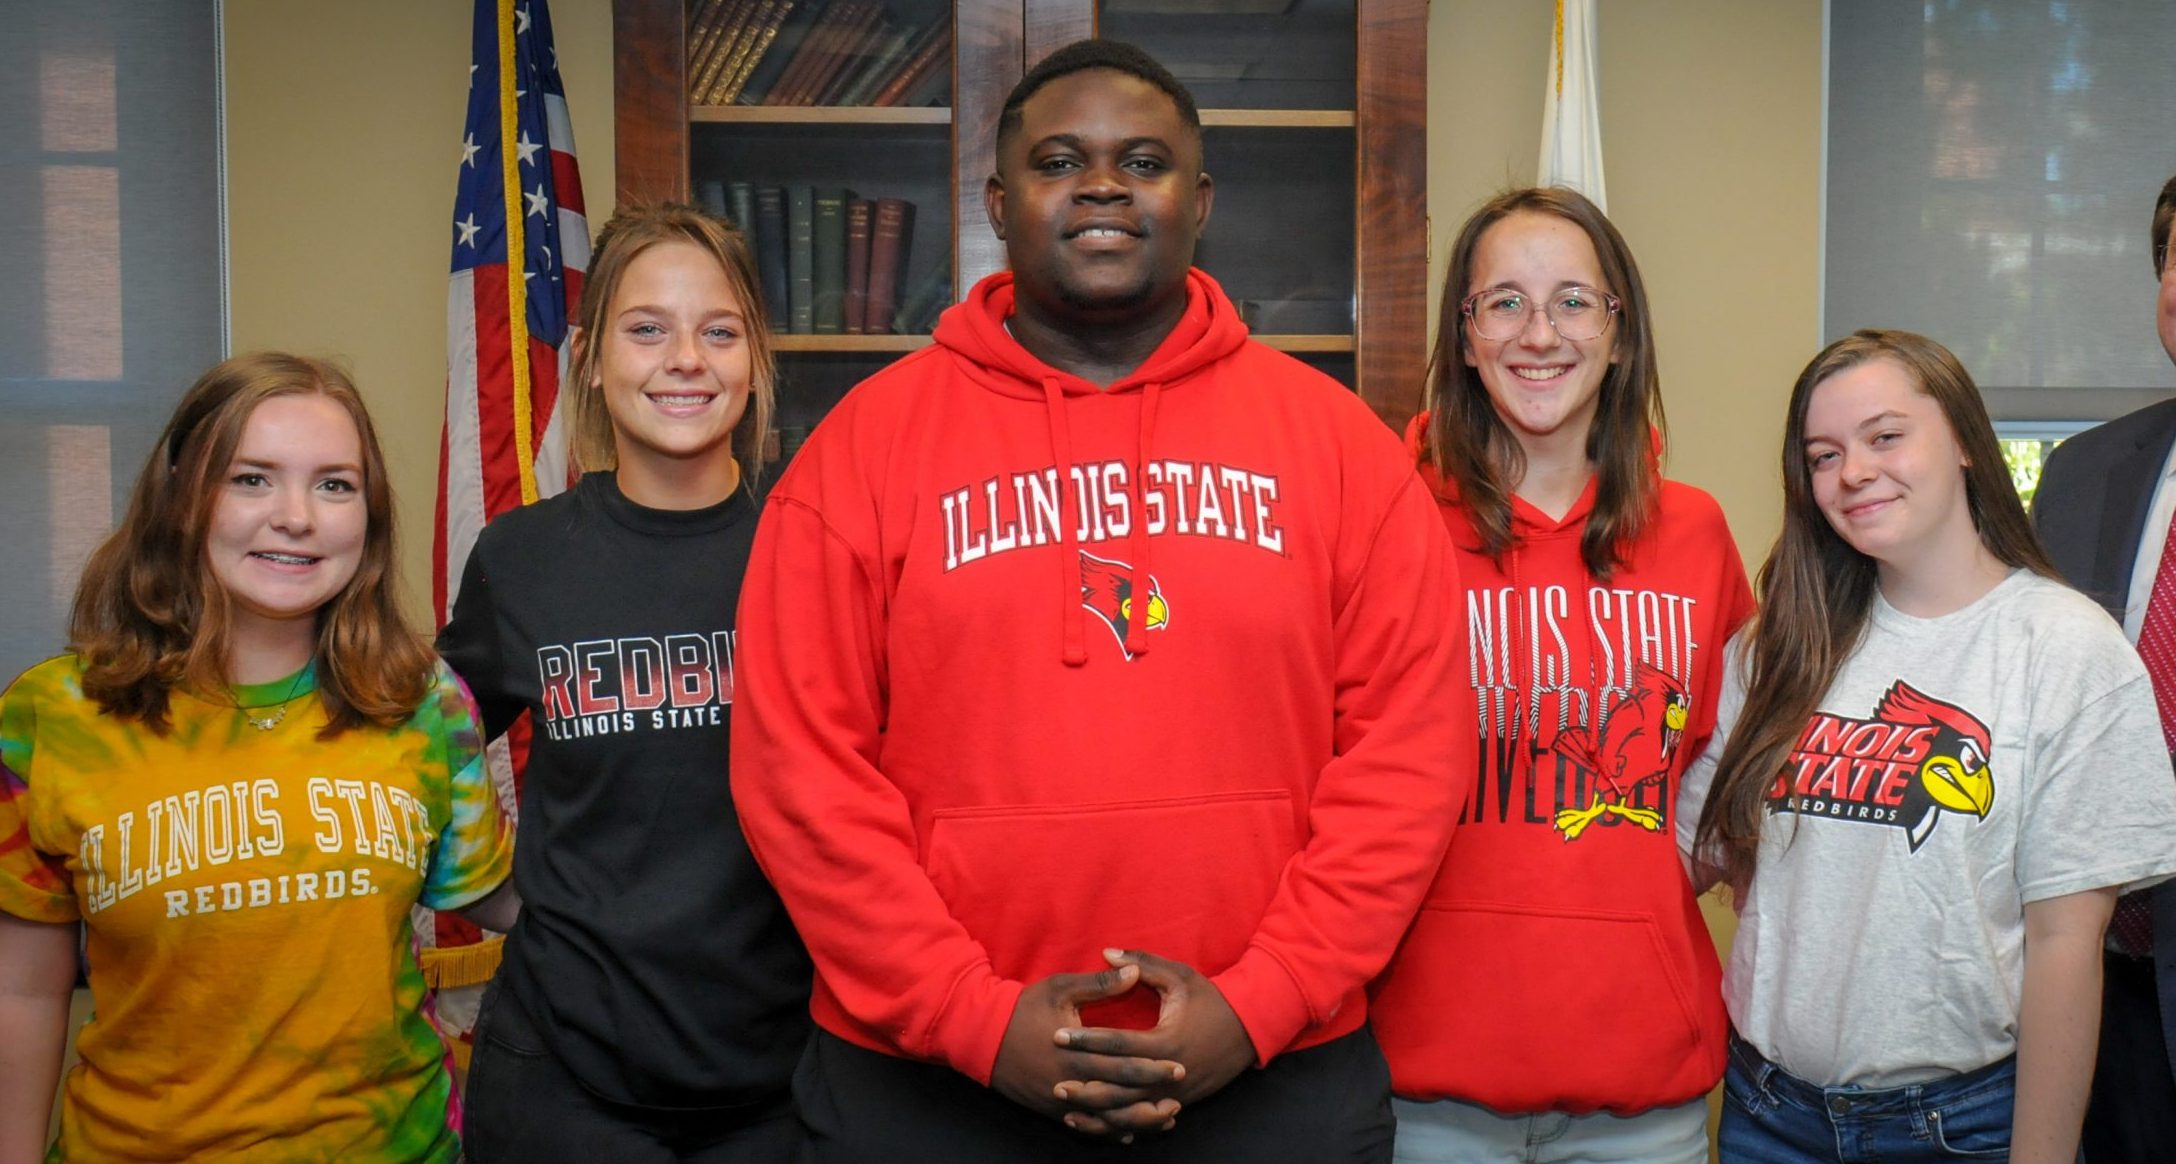 Group of five students in Illinois State University gear